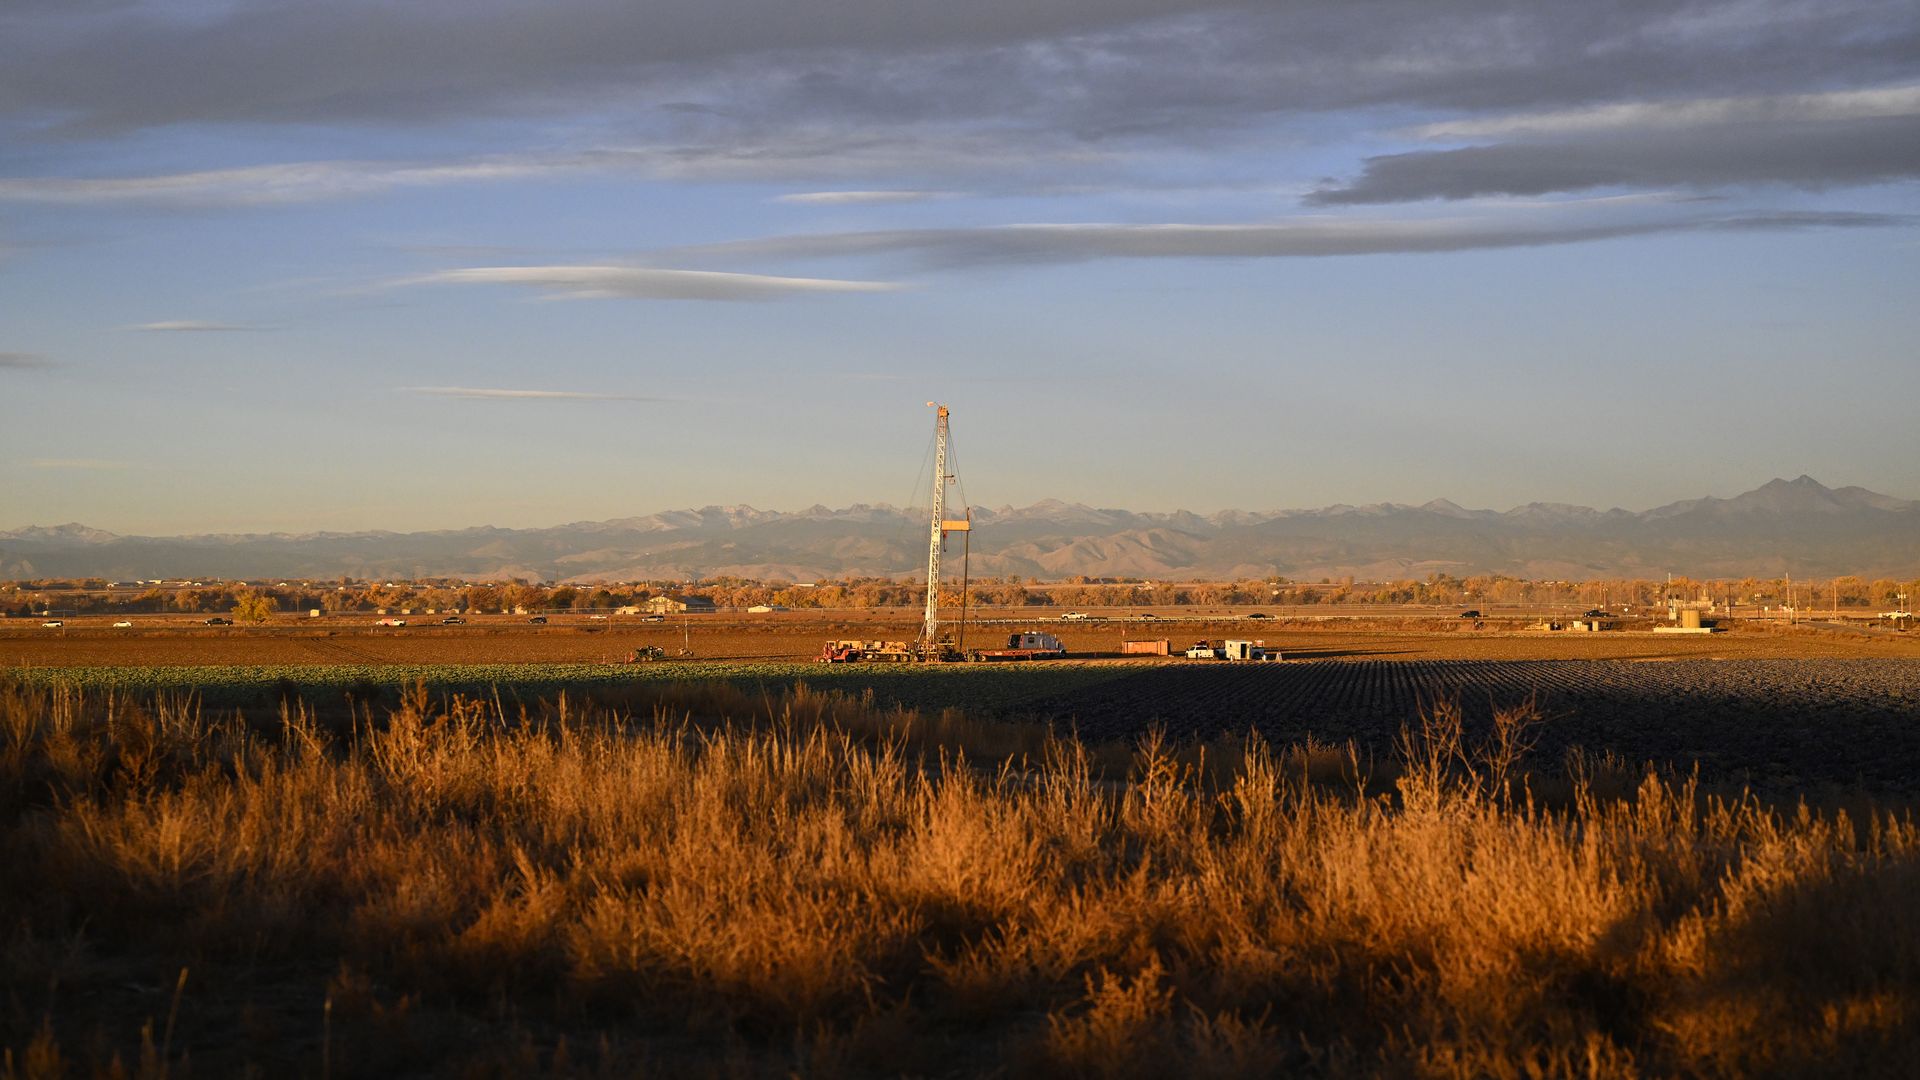 Crews work at an oil and gas rig in Weld County on Nov. 2. Photo: RJ Sangosti/Denver Post via Getty Images